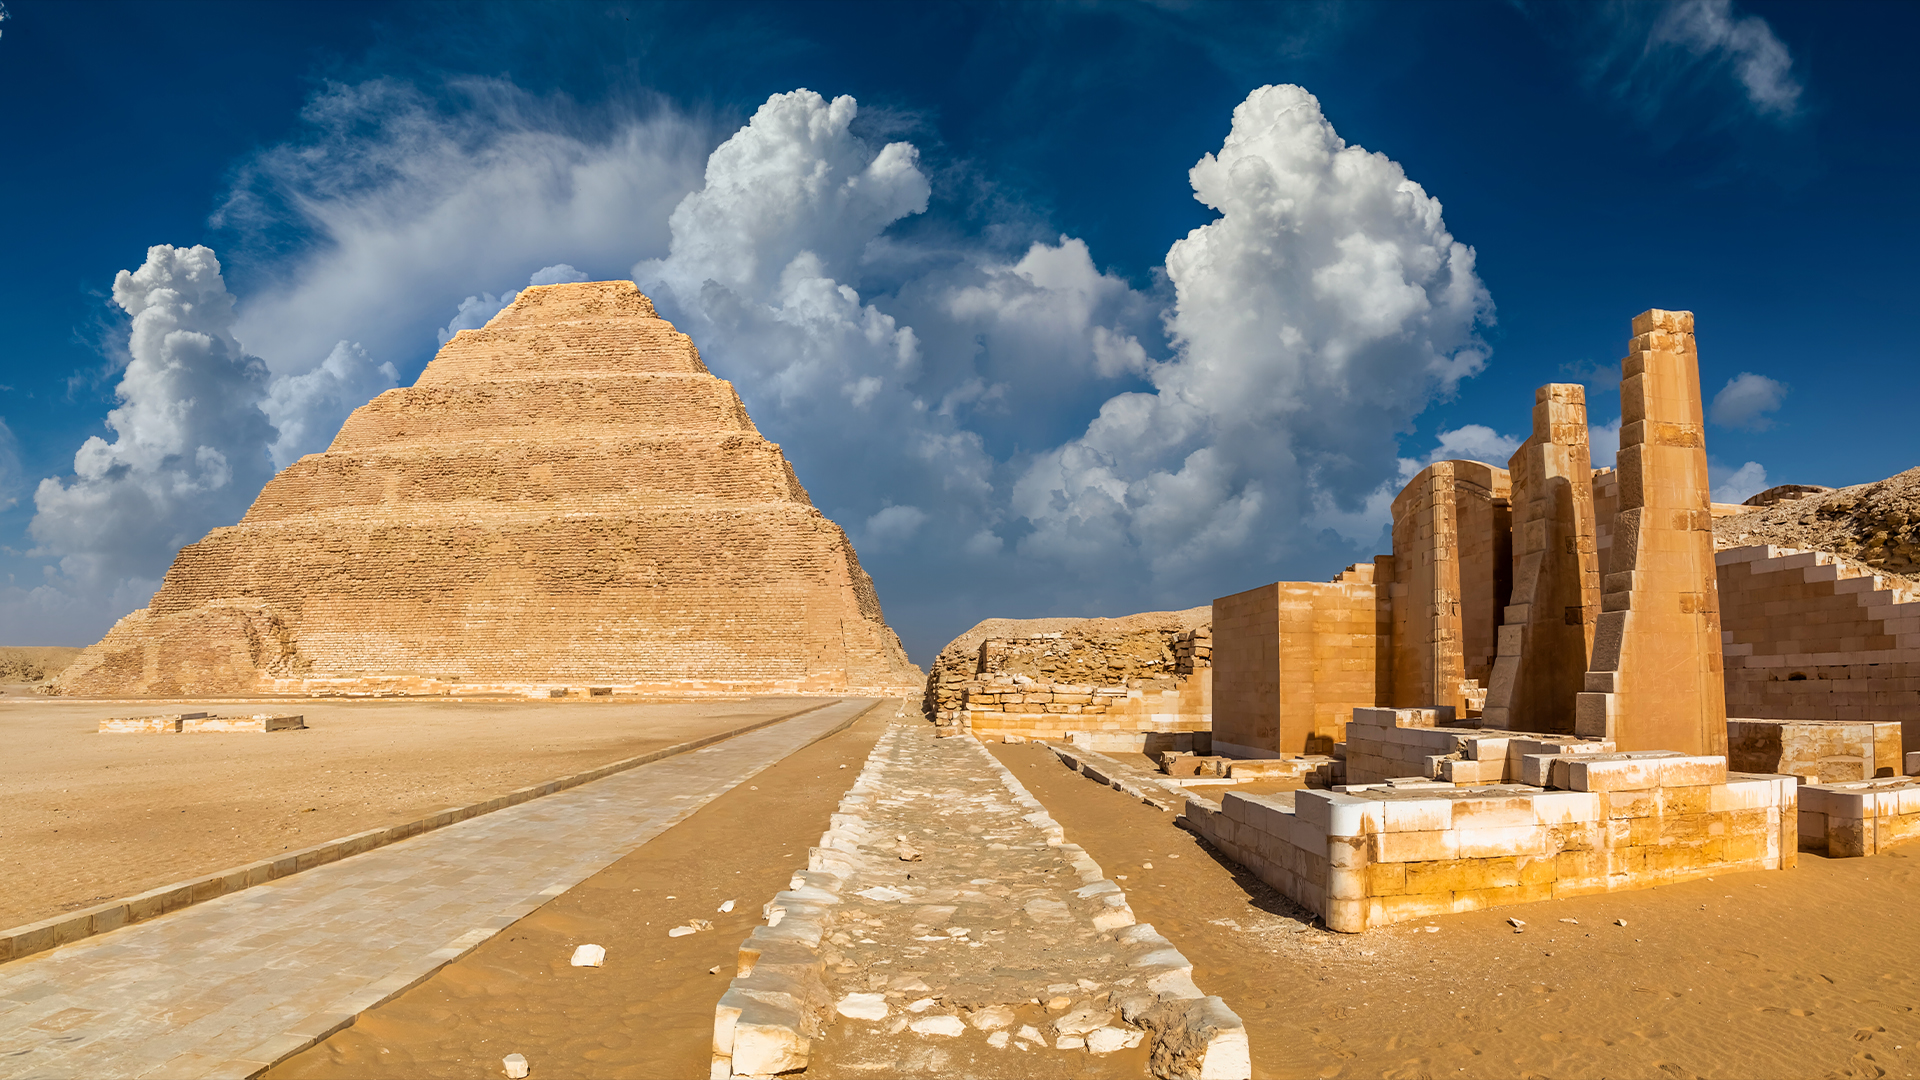 We see the Step Pyramid against a blue sky full of clouds.